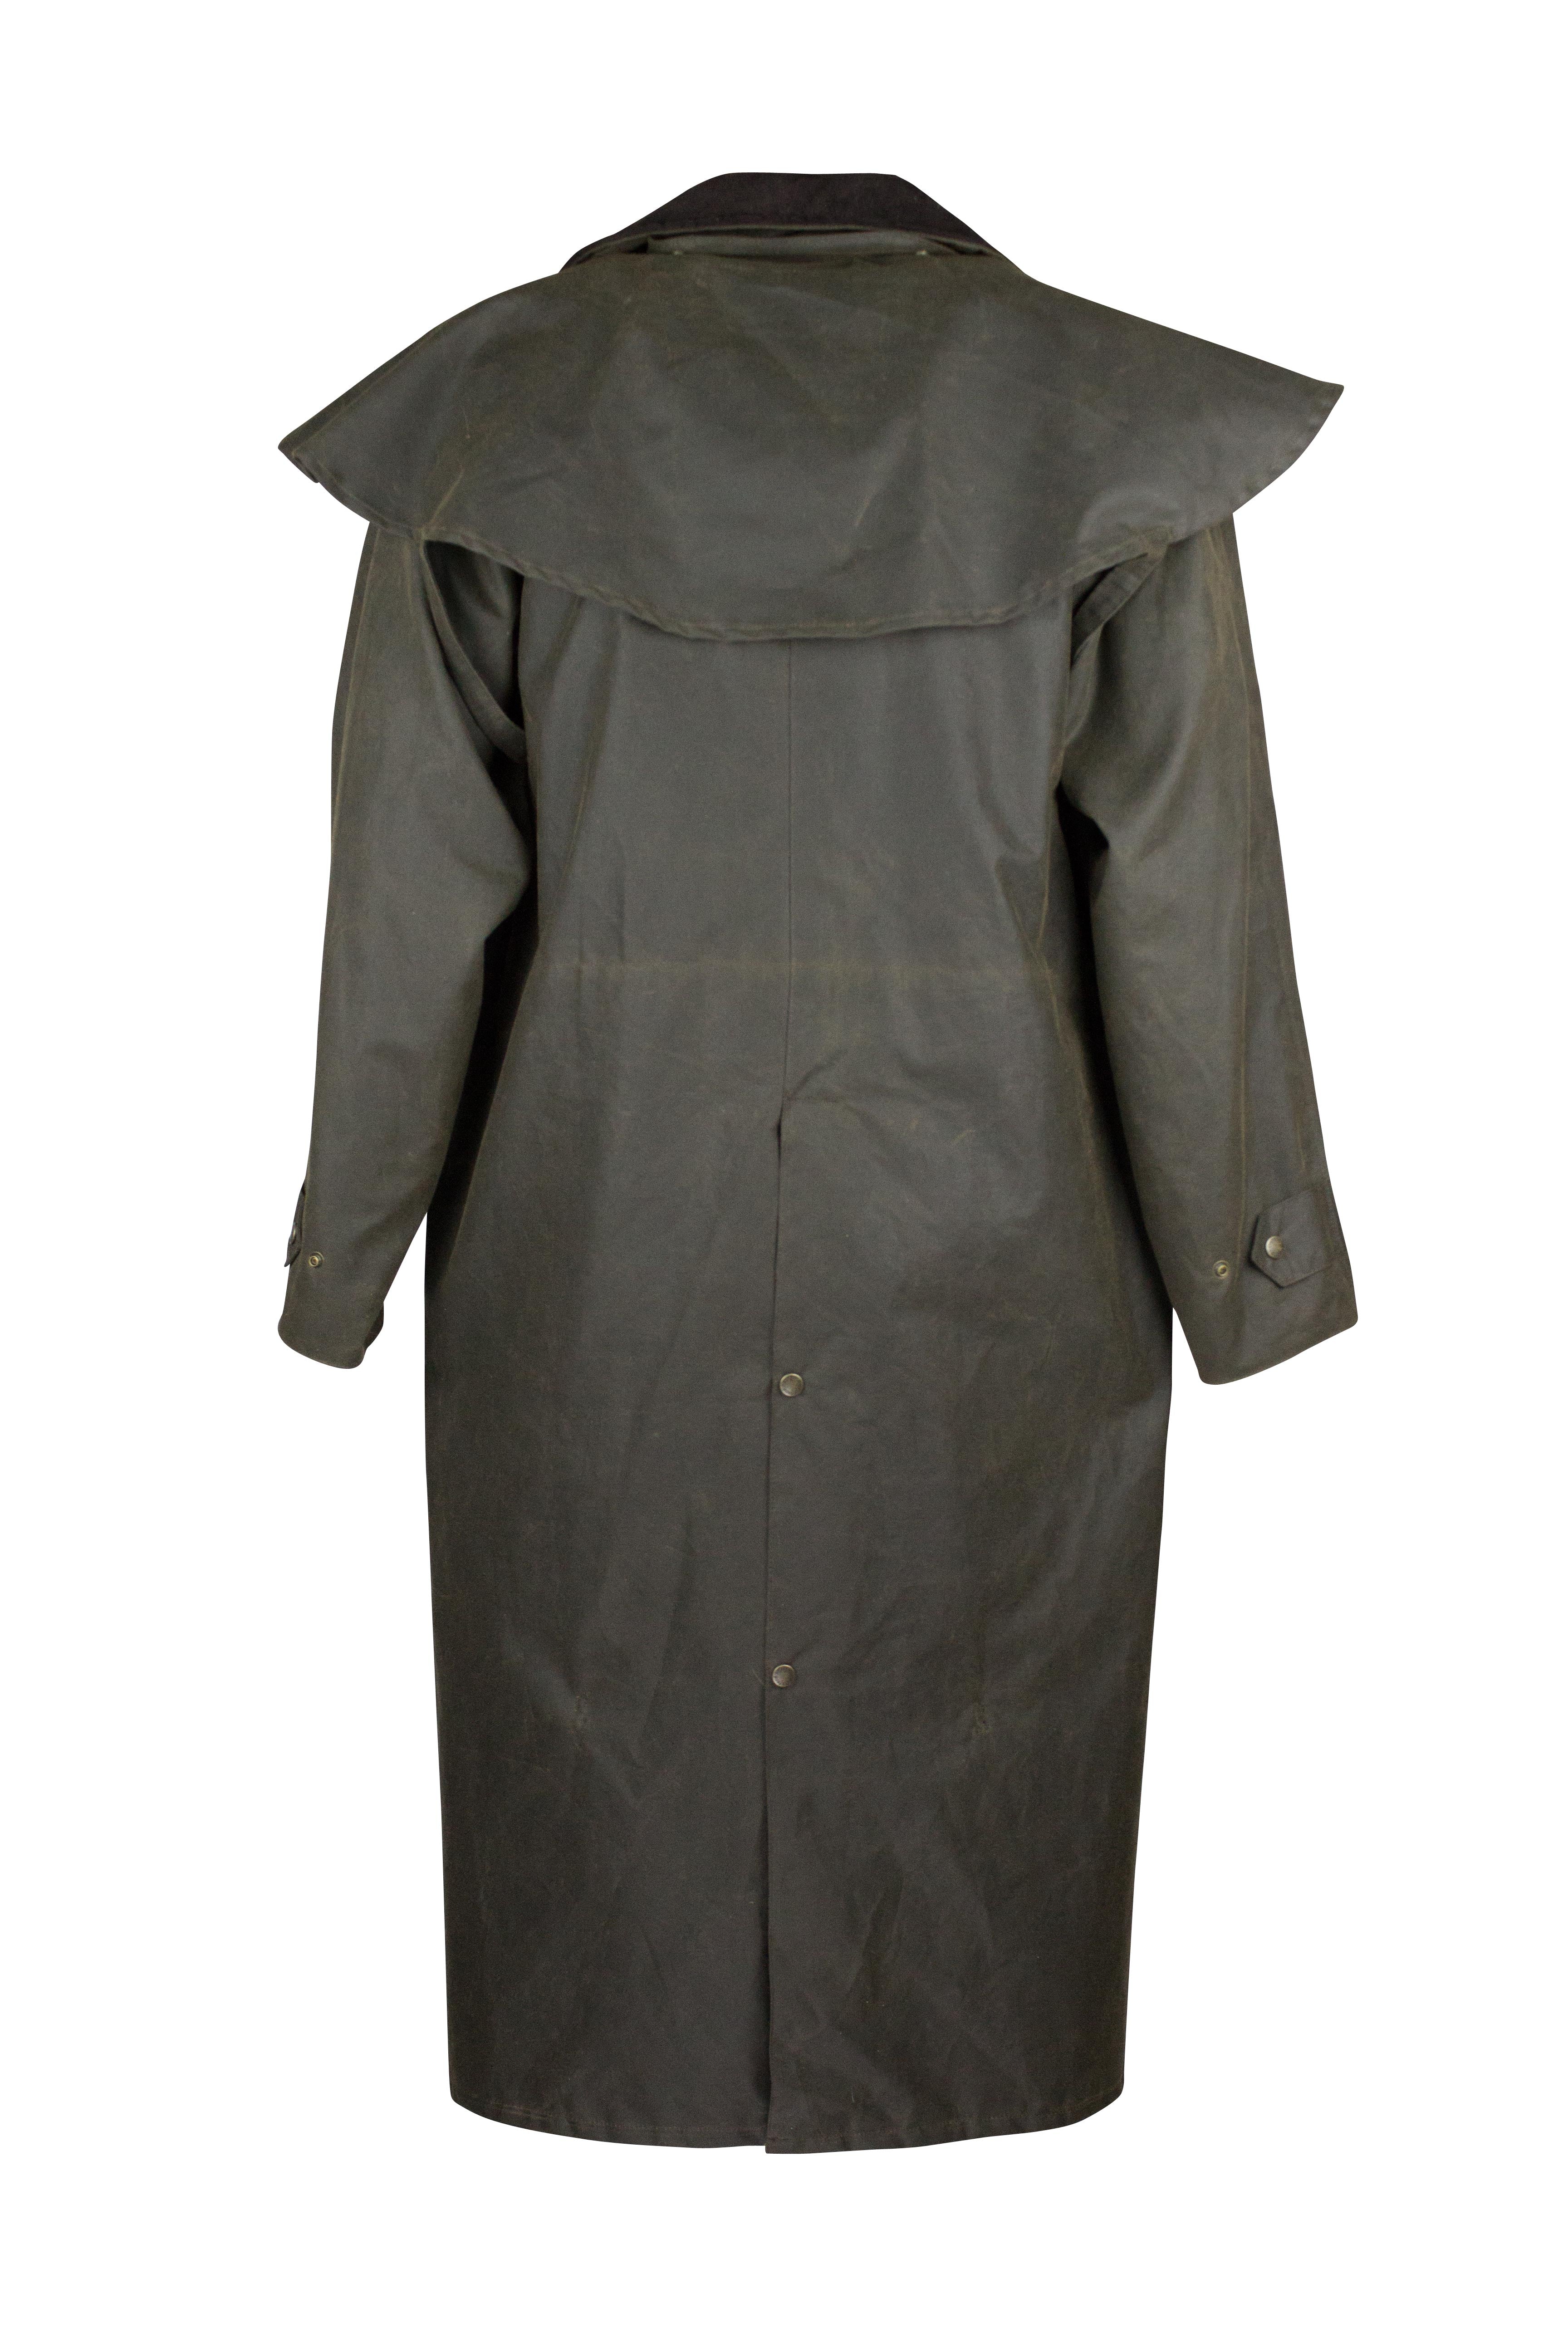 W70 - Deluxe Wax Outback Cape - DARK OLIVE - Oxford Blue